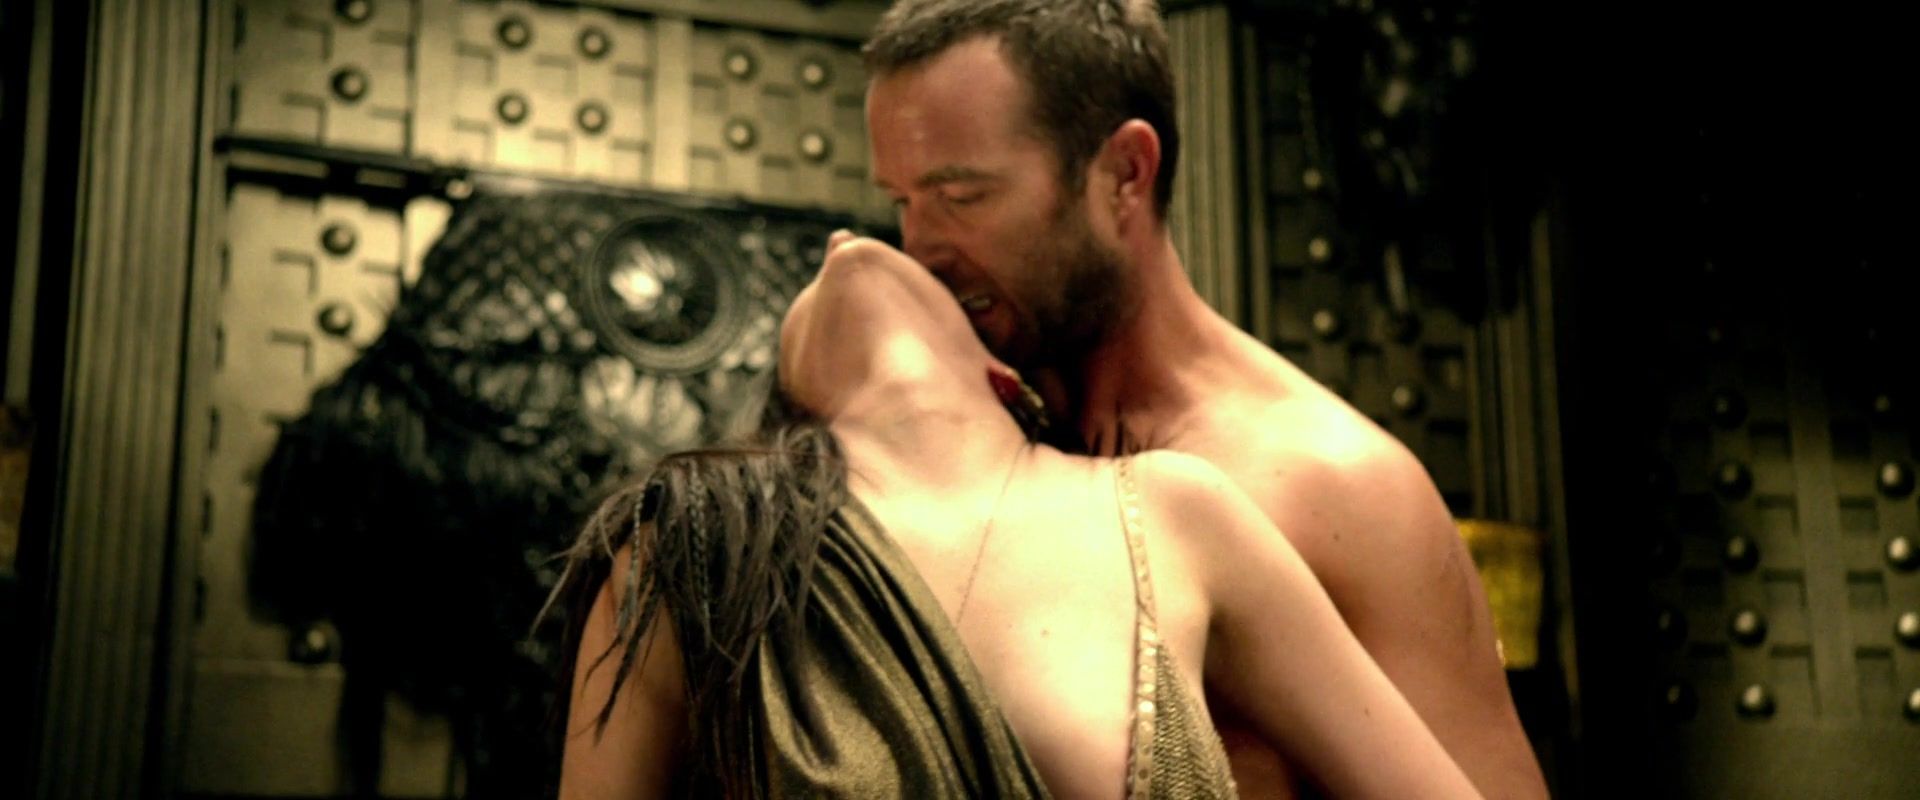 Polish Nude Celebs Scene Eva Green | The movie "300. Rise of an Empire" | Released in 2014 Tight Pussy - 1